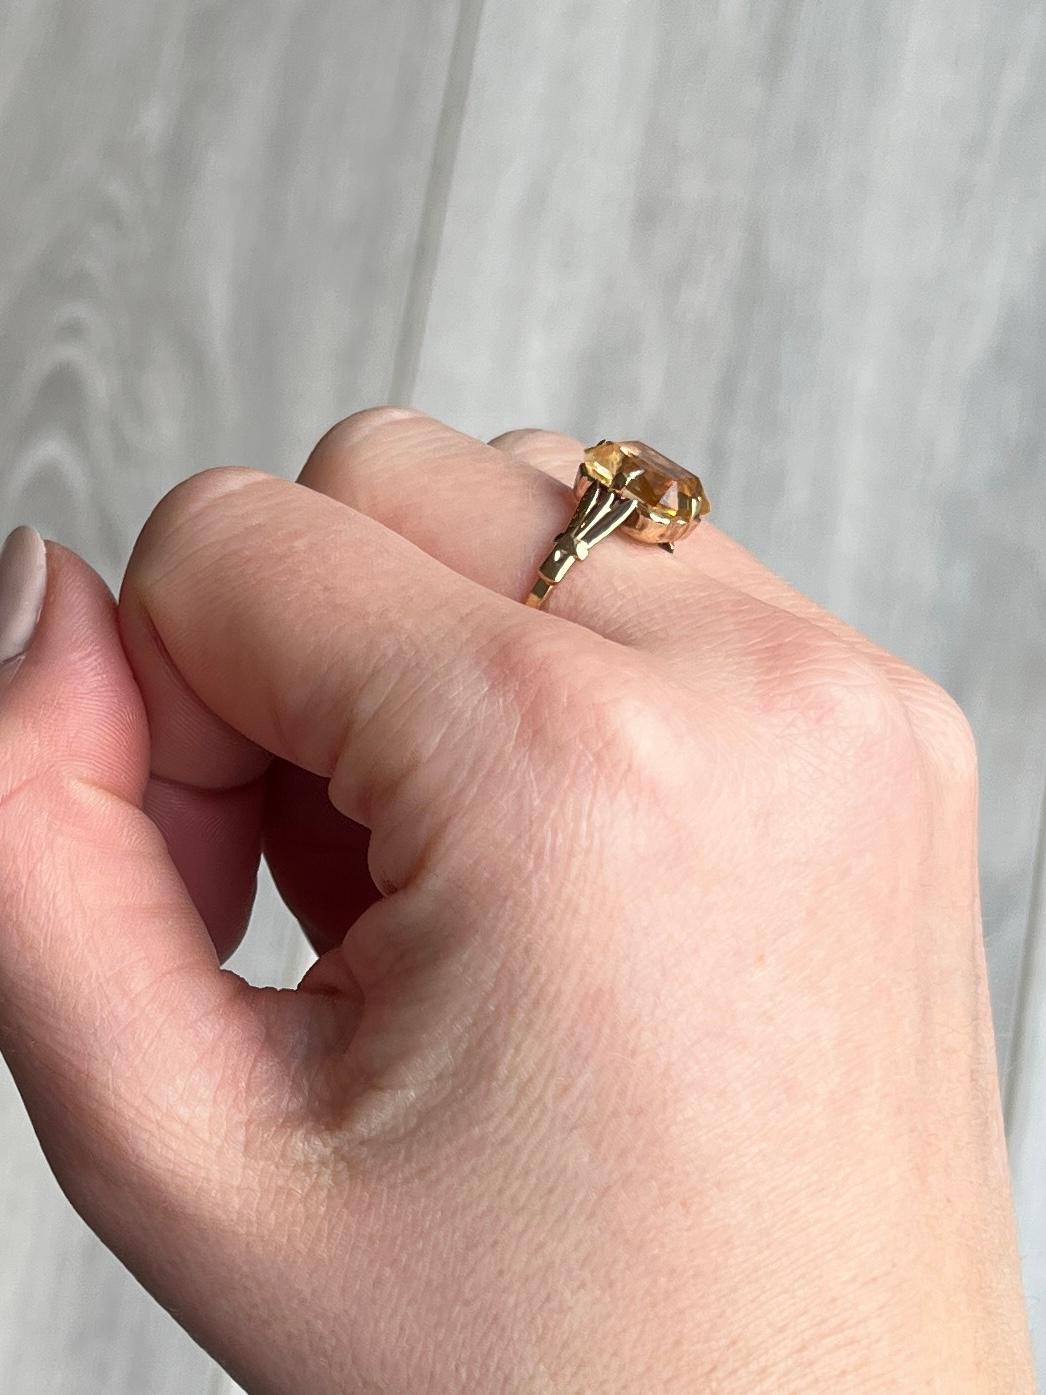 The gorgeous citrine stone is a bright yellow colour set in simple claws. 

Ring Size: N or 6 3/4 
Stone Dimensions: 11x9mm
Height Off Finger: 5.5mm 

Weight: 1.9g